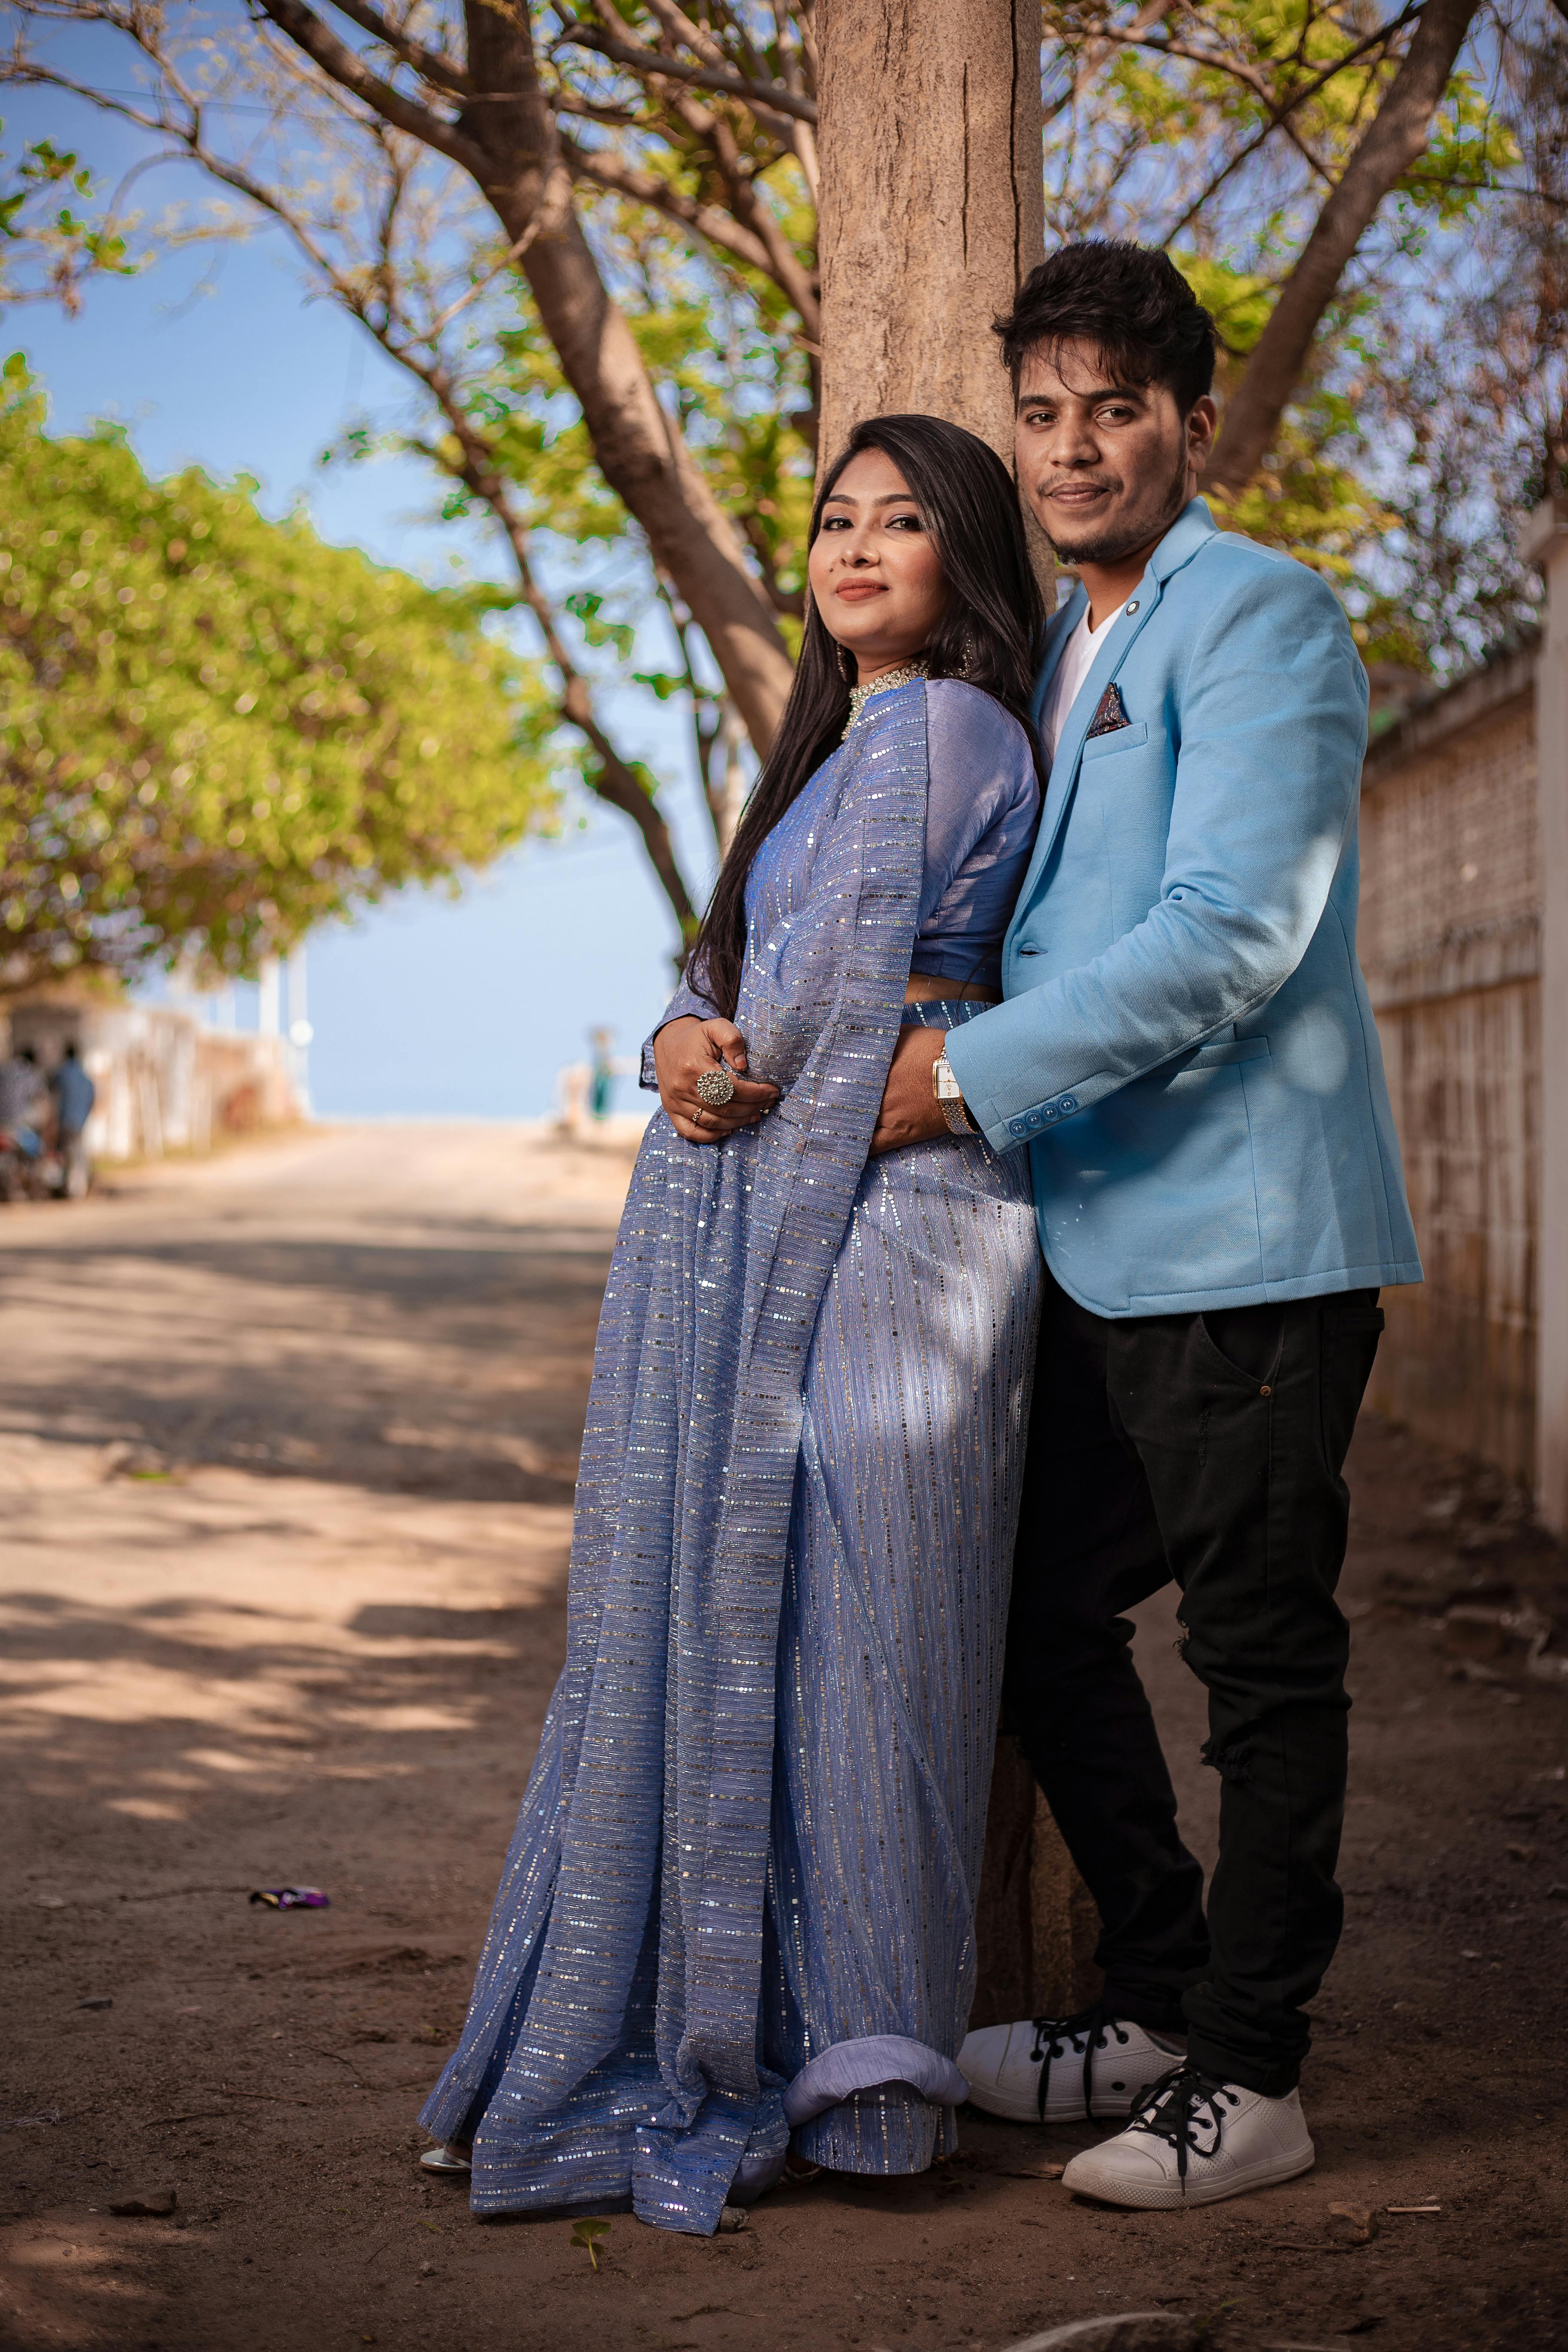 Image may contain: 1 person, standing | Wedding couple poses photography,  Pre wedding photoshoot outdoor, Wedding couple poses